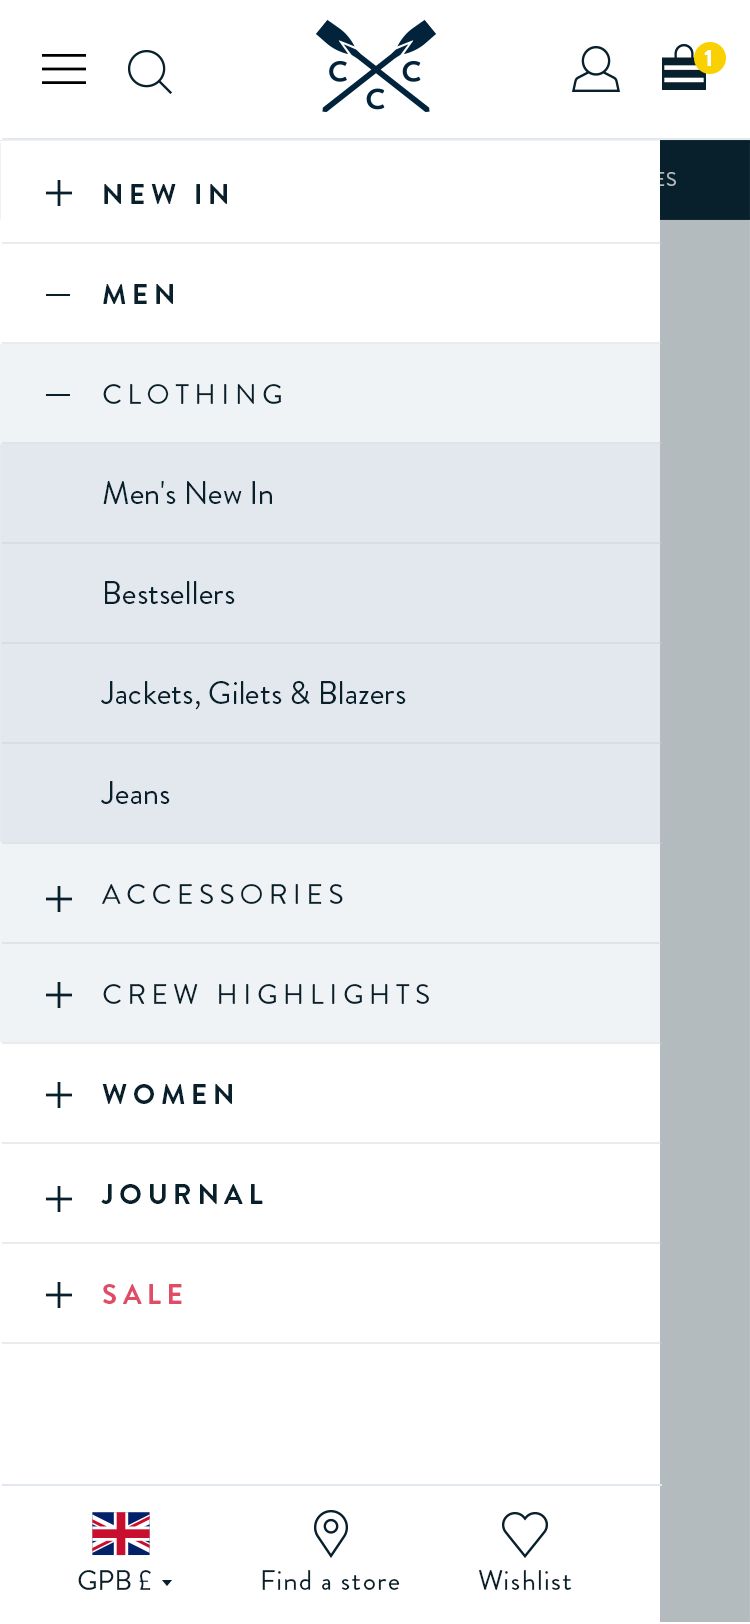 Responsive Digital design of the Crew Clothing homepage